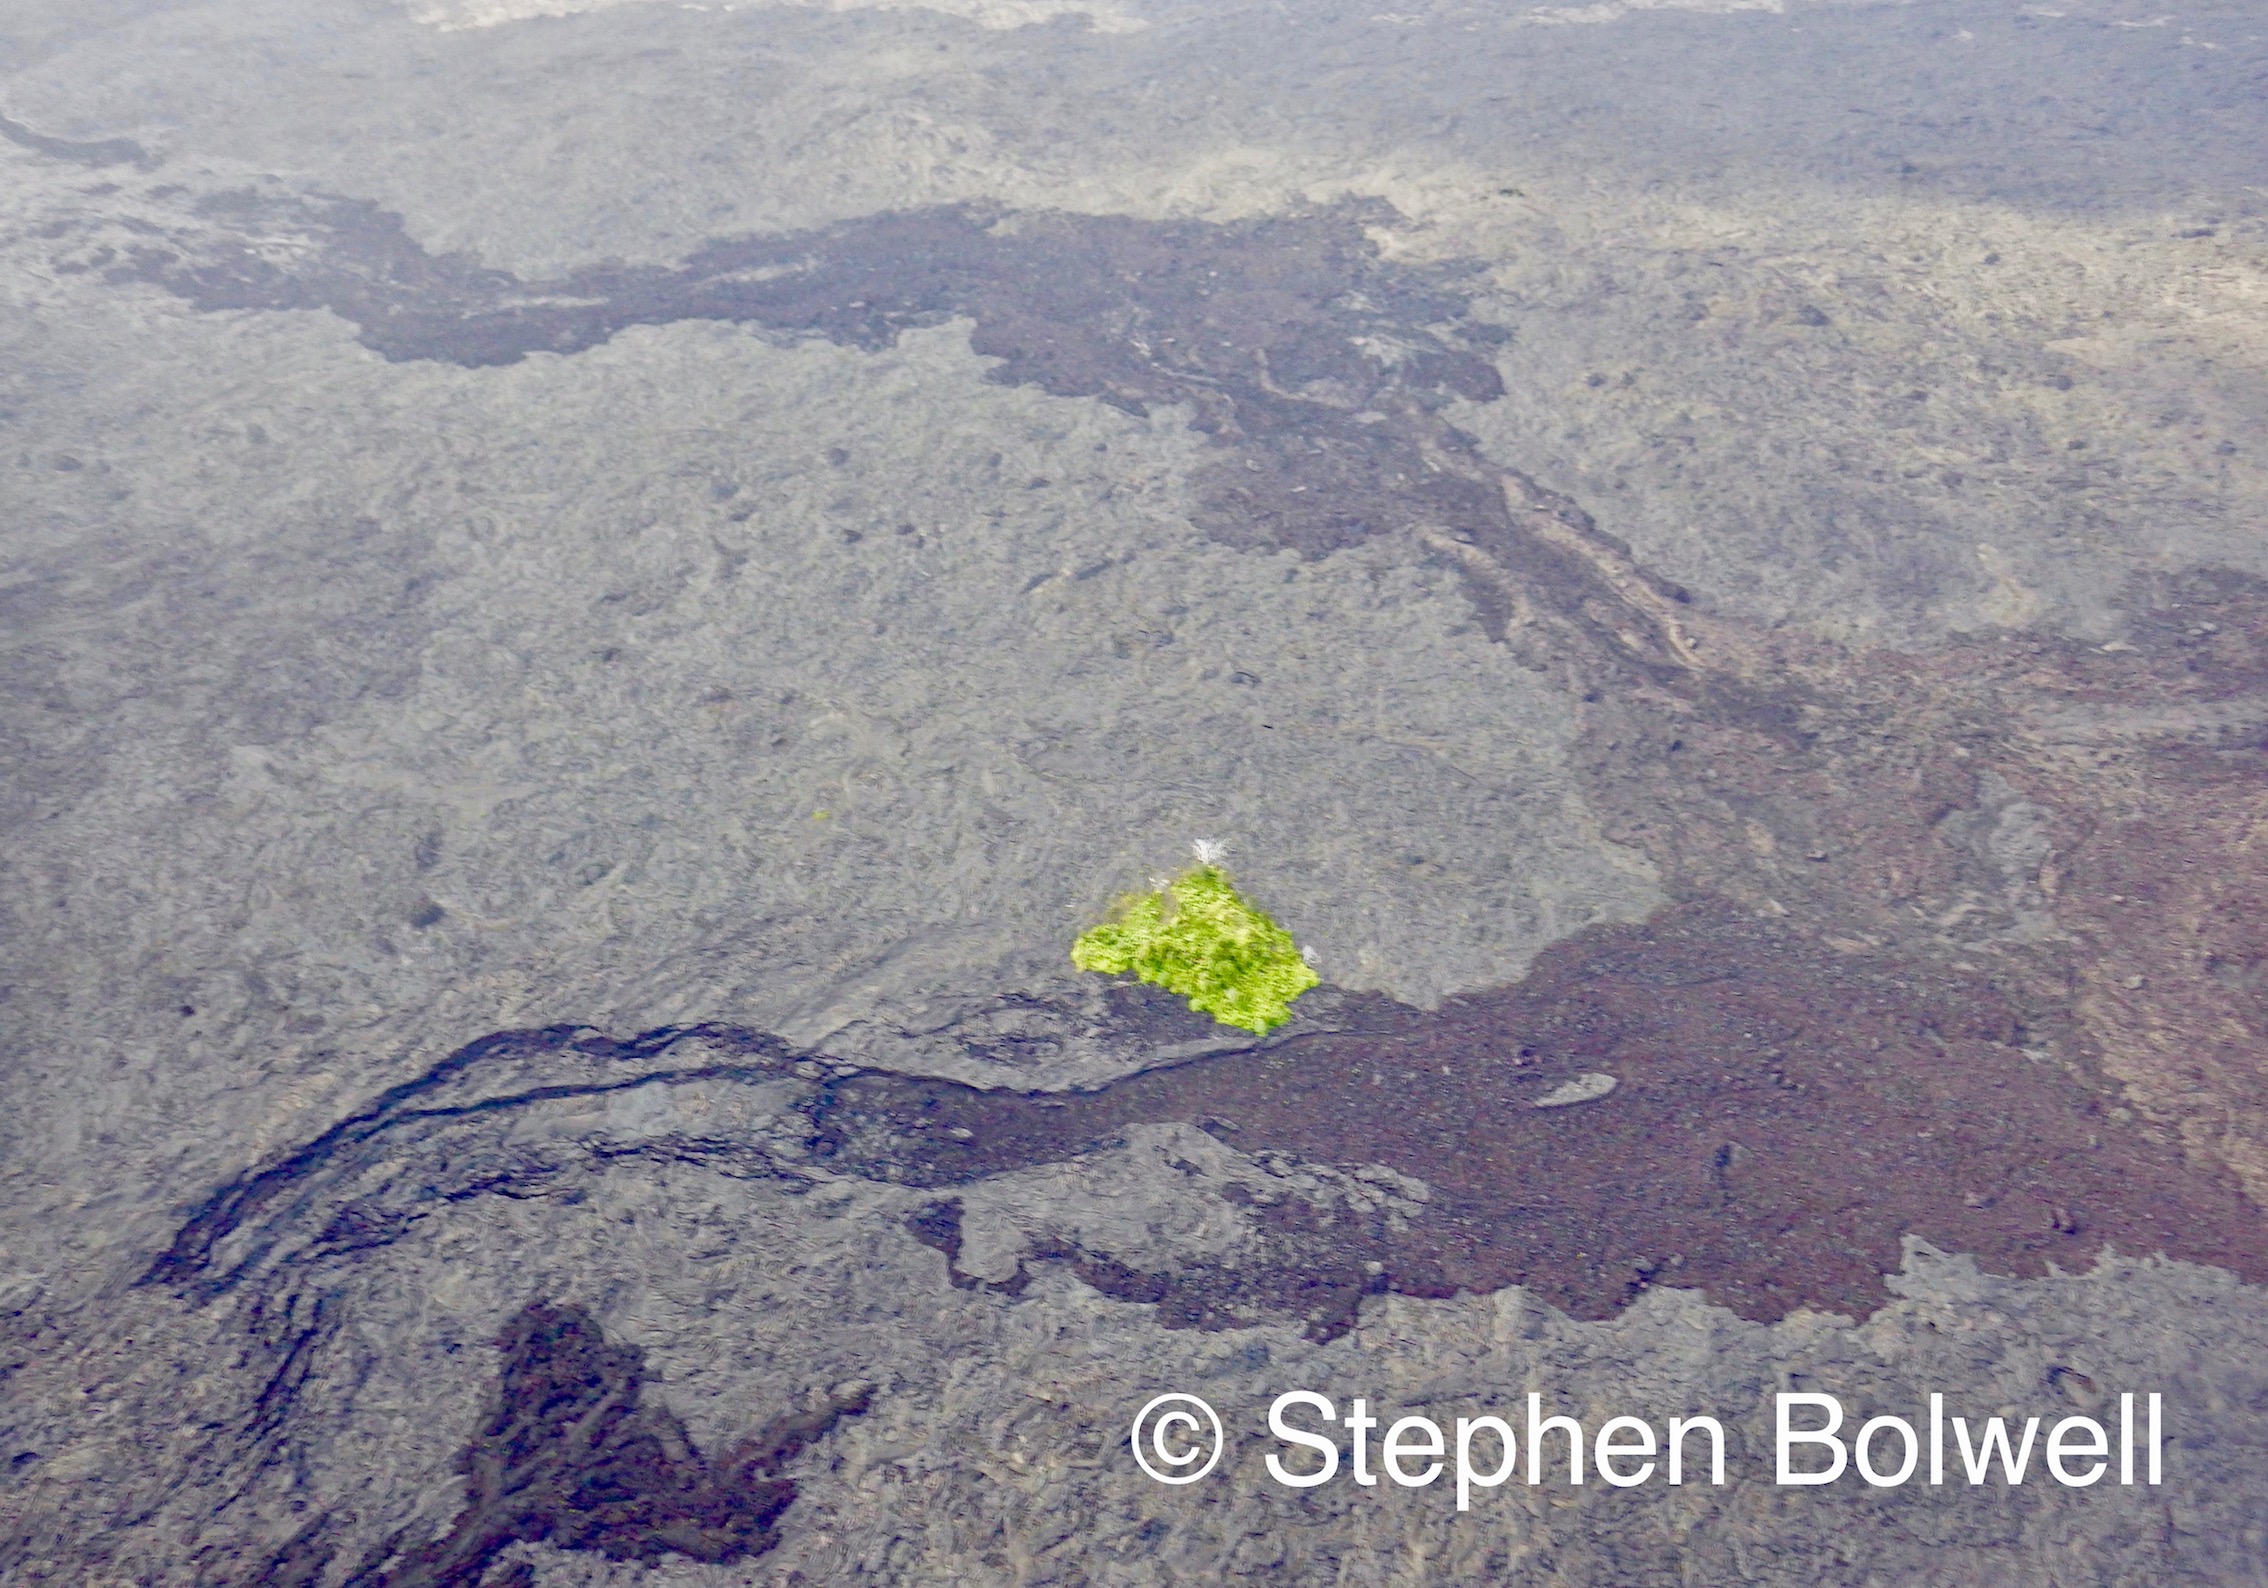 Like water lava flows to the lowest point and high ground often preserves natural areas and if they are large enough to remain viable, will retain species to eventually recolonise the area.